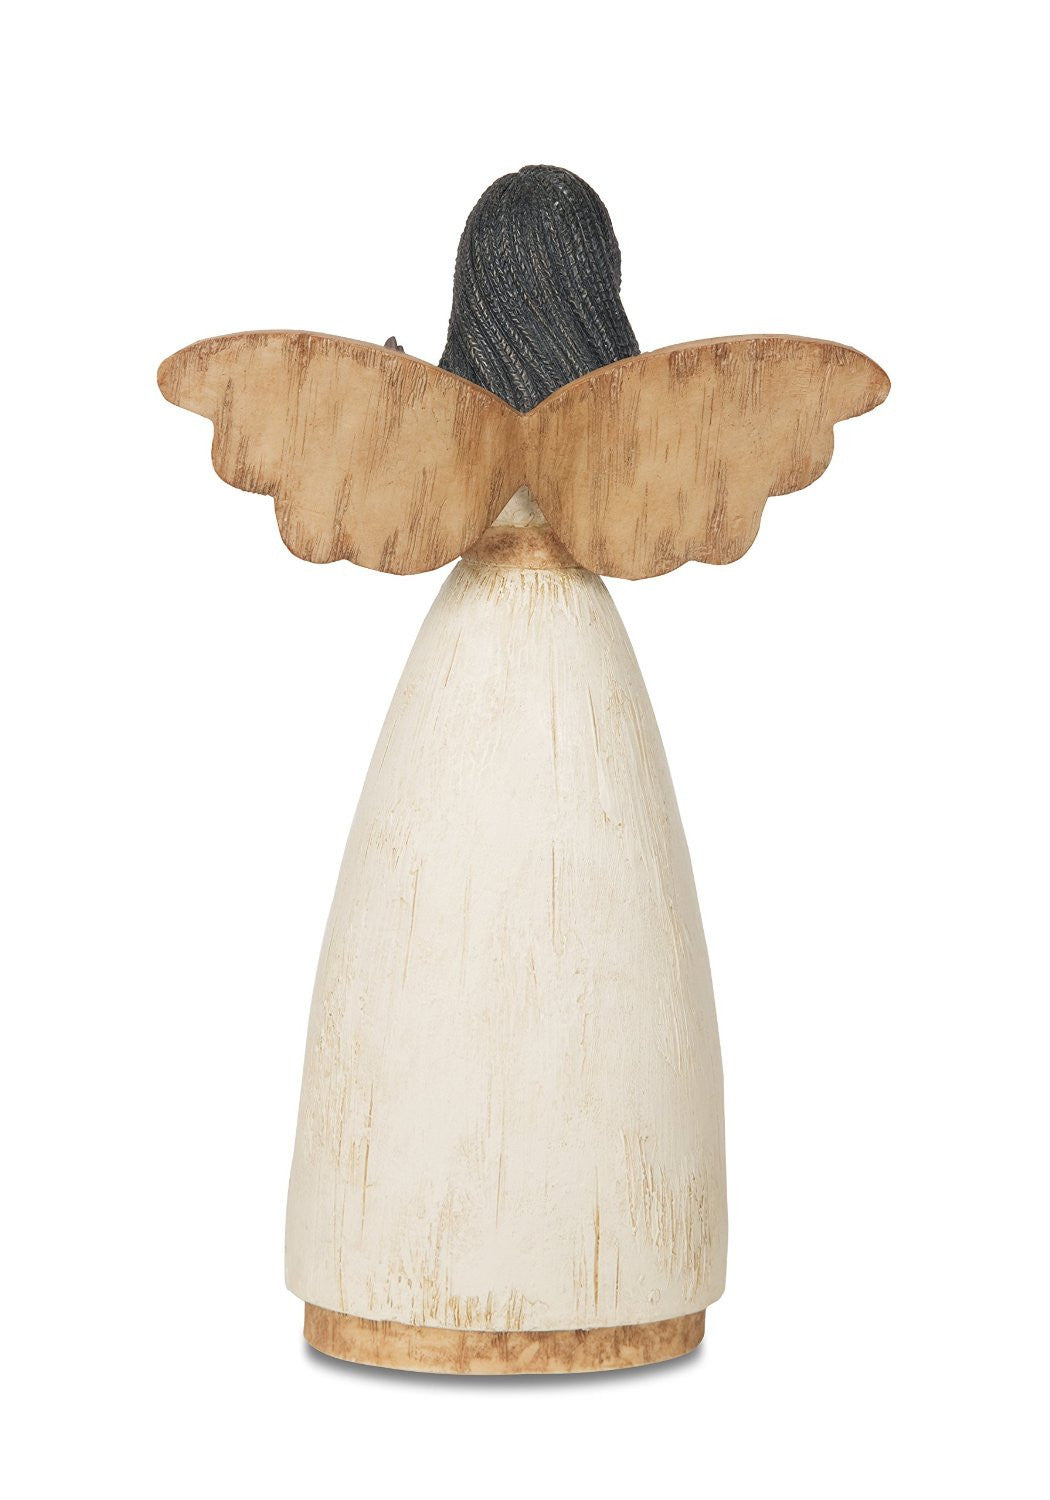 African American Mother Angel Figurine with Hearts: Simple Spirits Collection by Pavilion Gifts